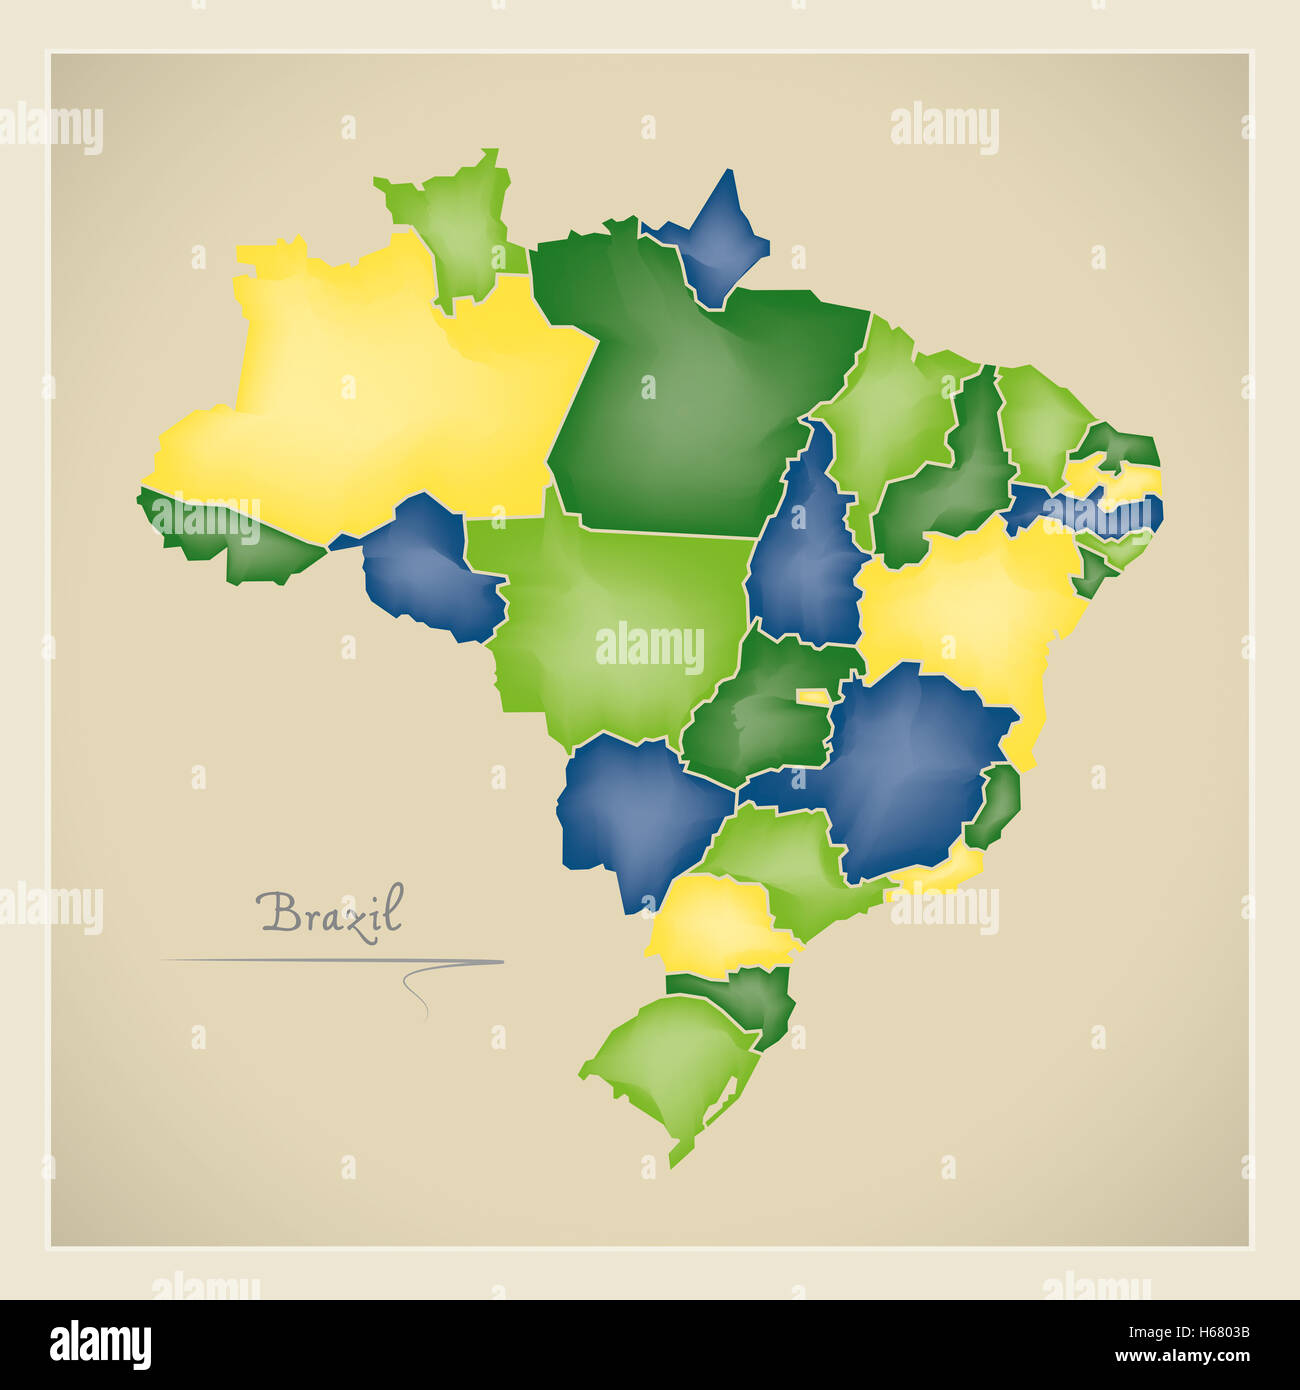 Brazil map artwork with national colors illustration Stock Photo